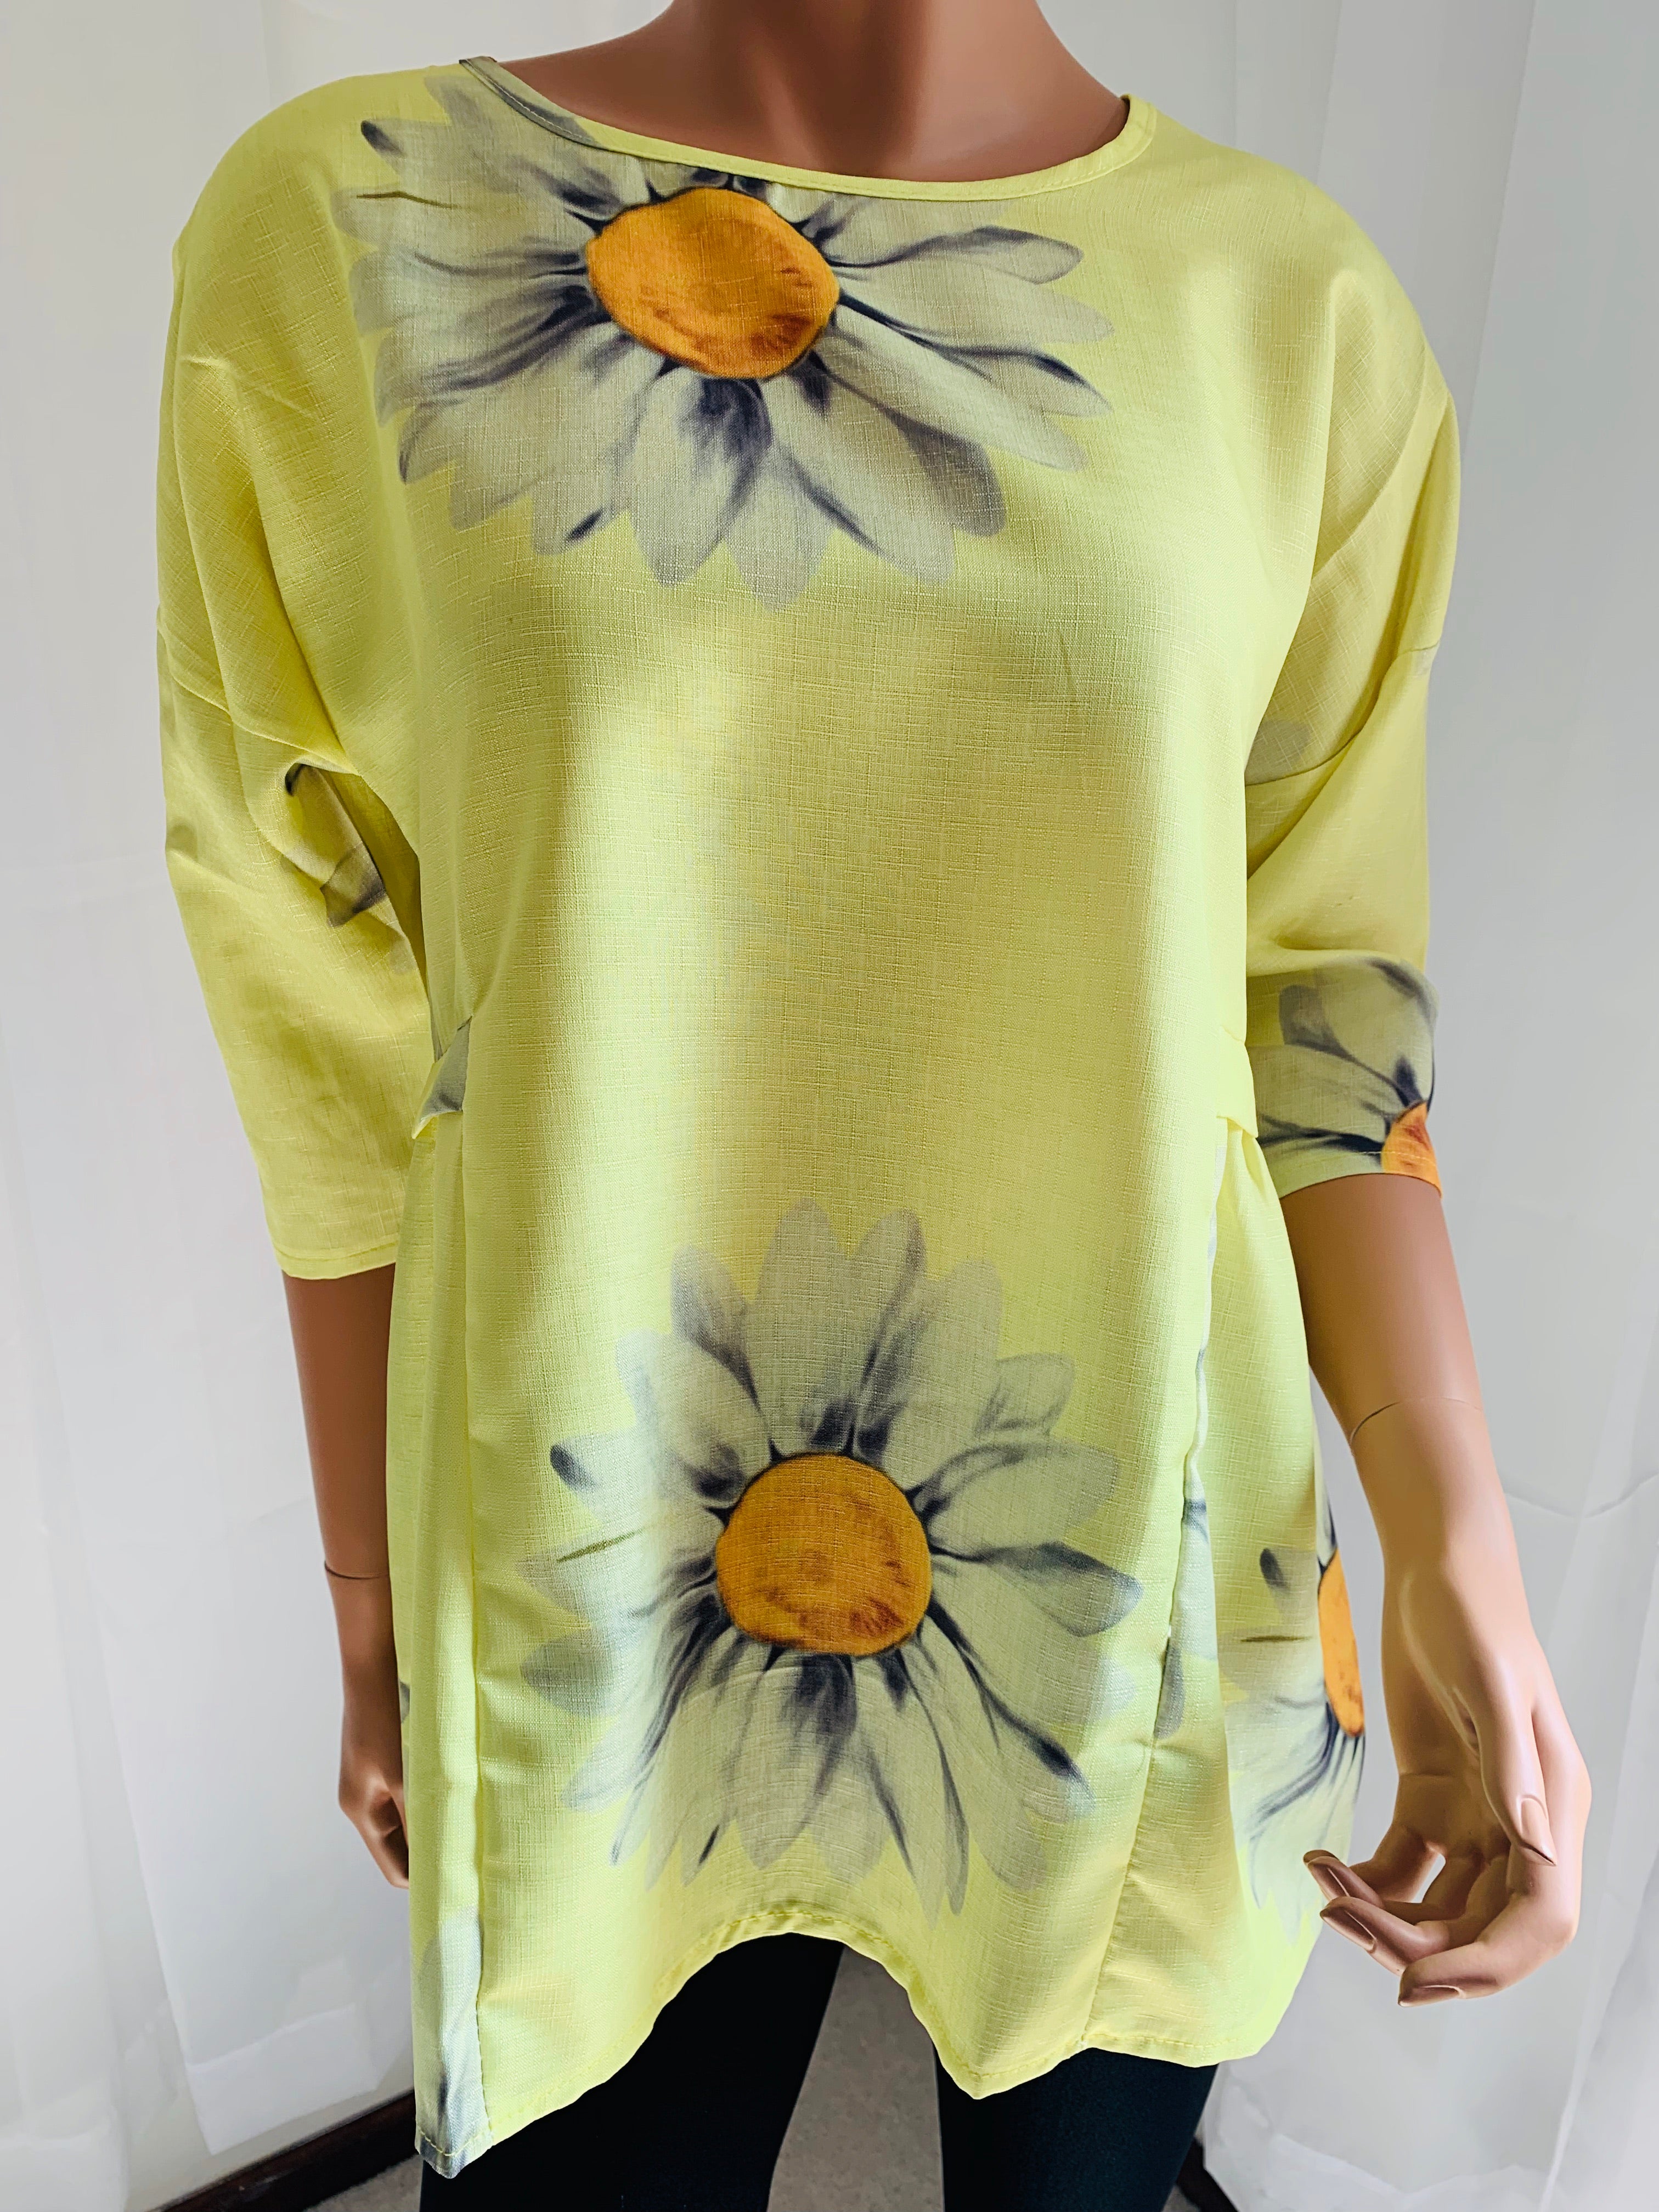 Relaxed fit cotton blend top with 3/4 sleeve. Vivid yellow color and trending daisy design makes this top wearable for any occasion.  Note: No stretch so they fit on the smaller end of size guide. This is a nice quality top! 